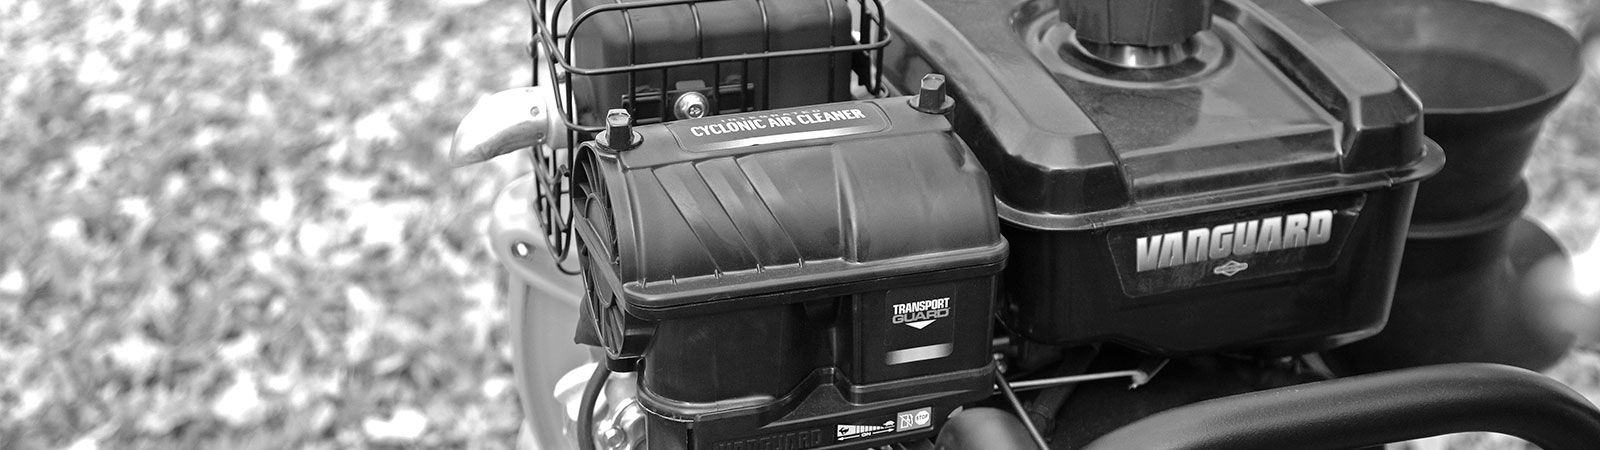 Vanguard Single-Cylinder engine on a piece of outdoor equipment